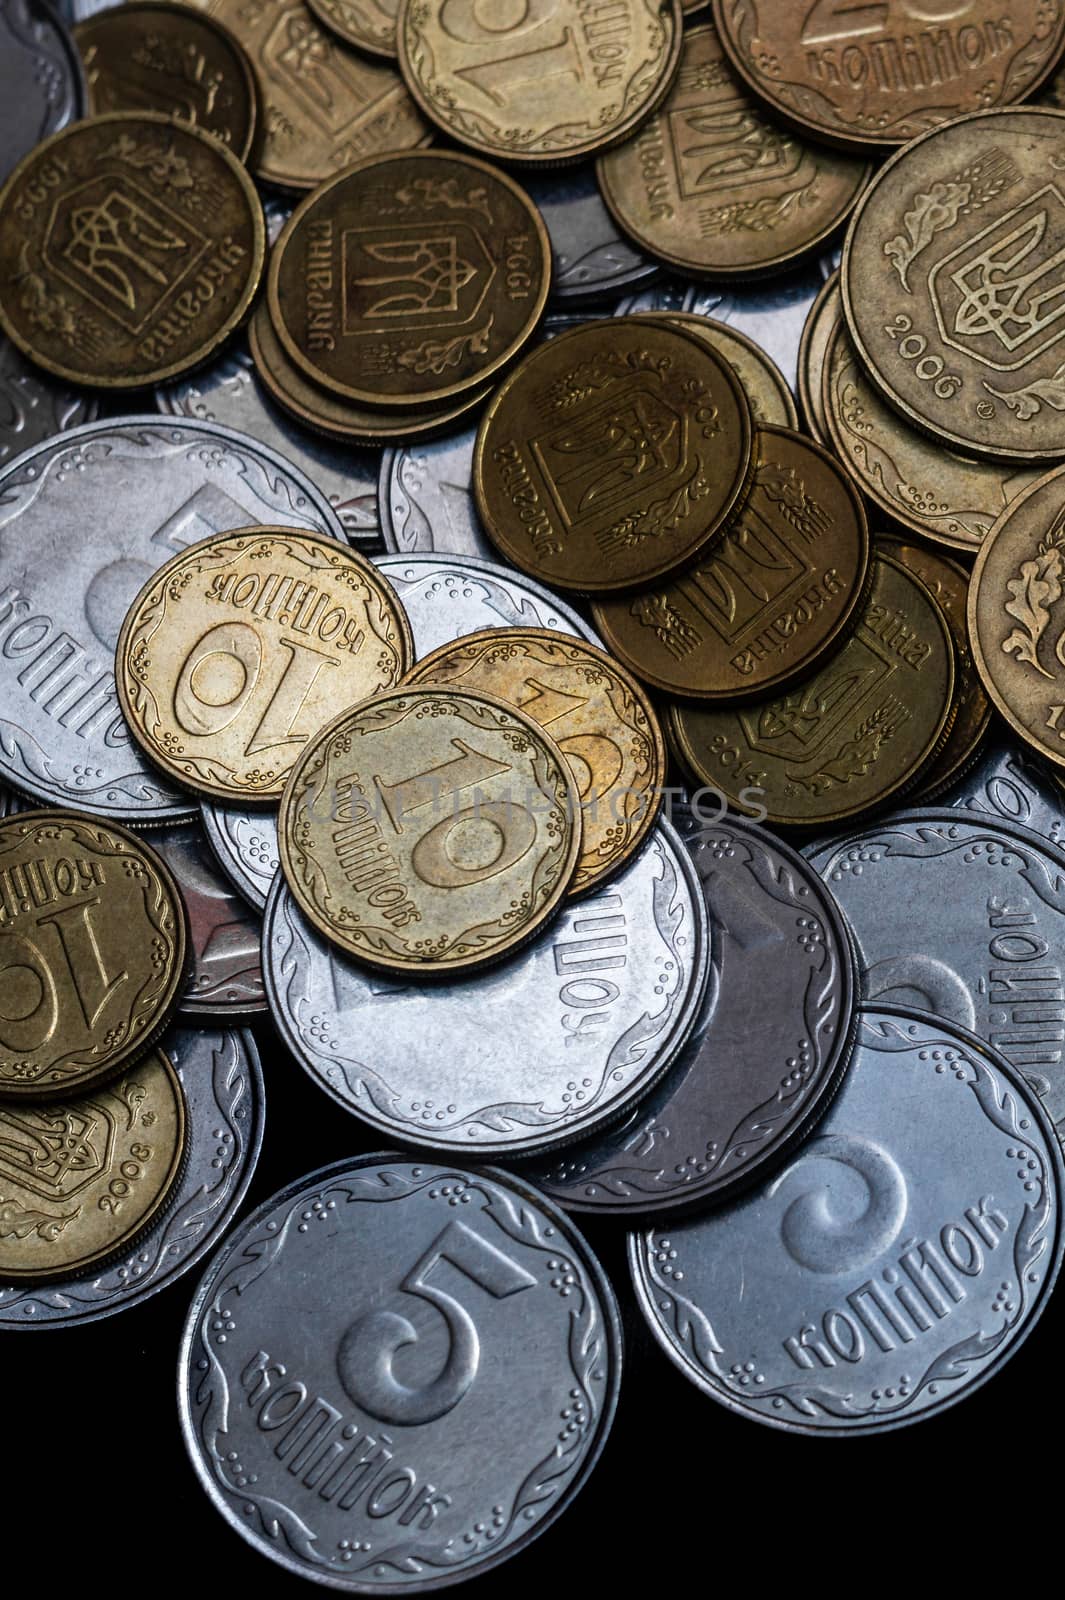 Ukrainian coins isolated on black background. Close-up view. Coins are located in the center of frame. A conceptual image. by alexsdriver